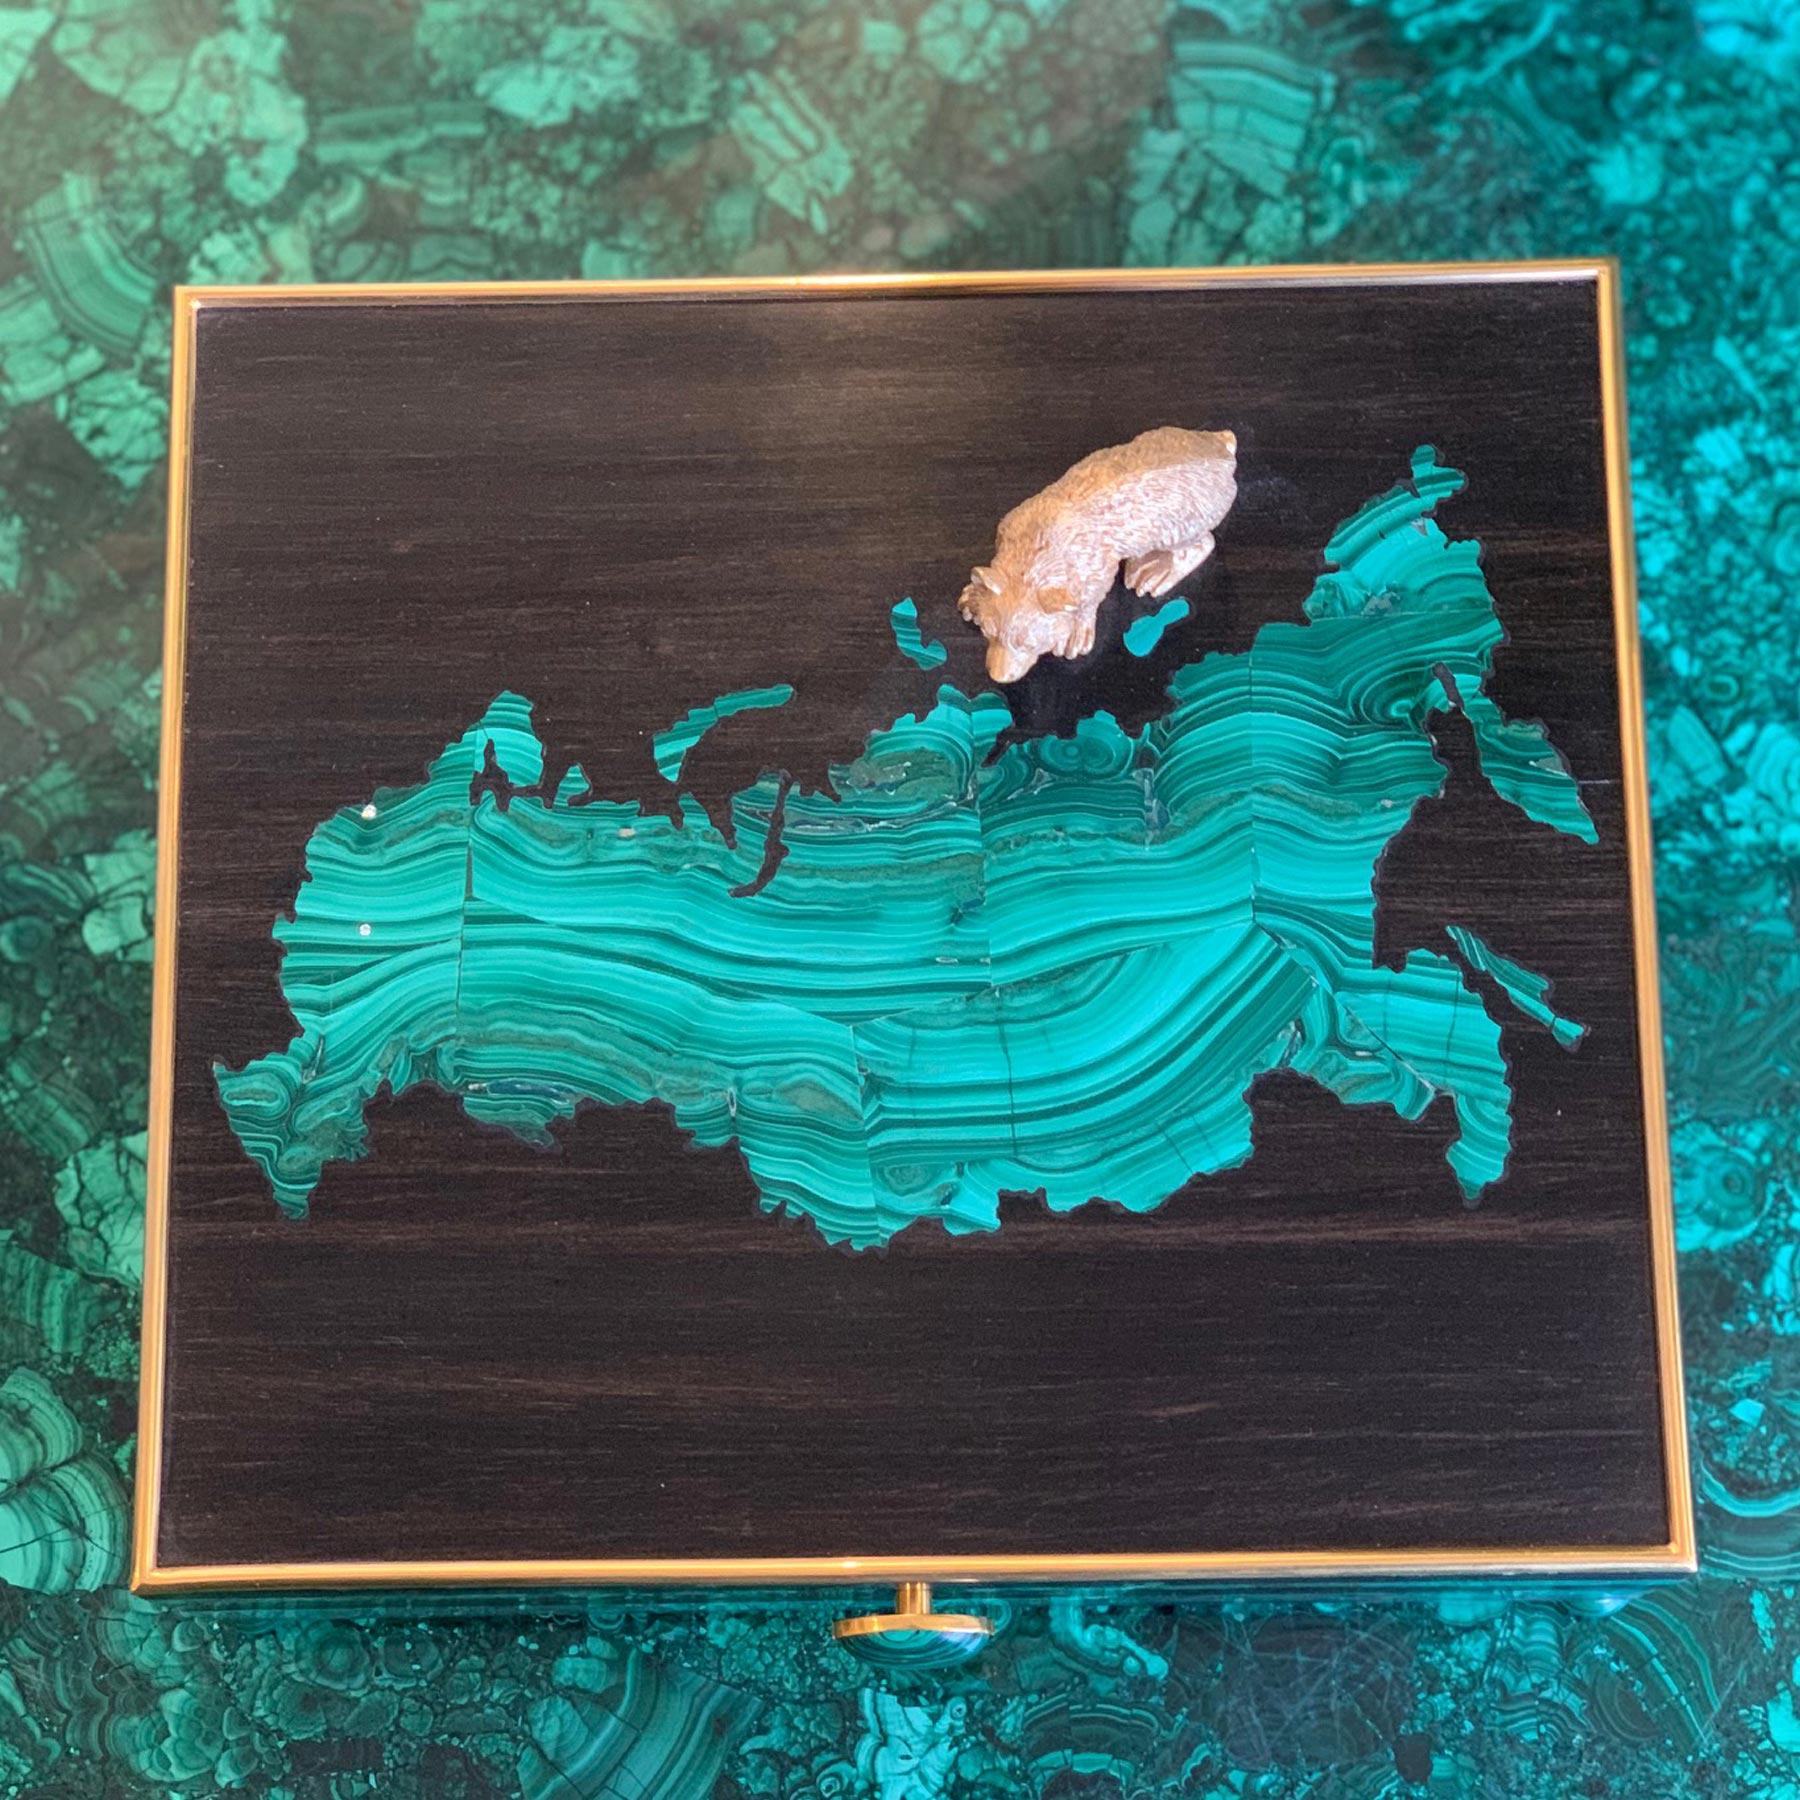 European Humidor by Glynn Lockett with Malachite Map of Russia For Sale